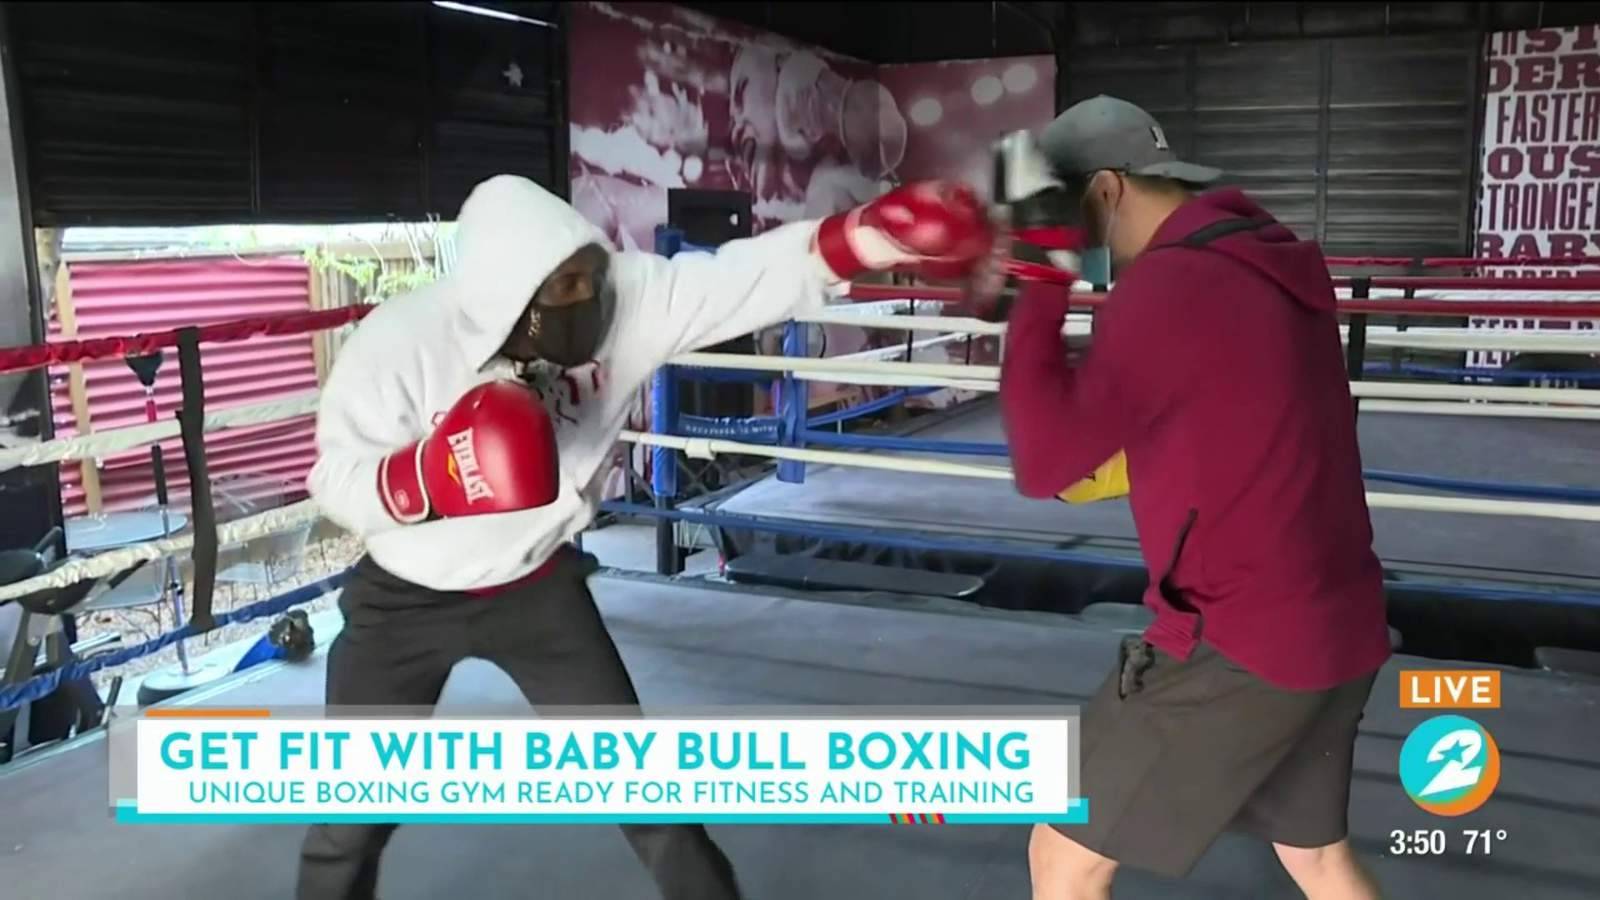 Punching into the new year with Baby Bull Boxing